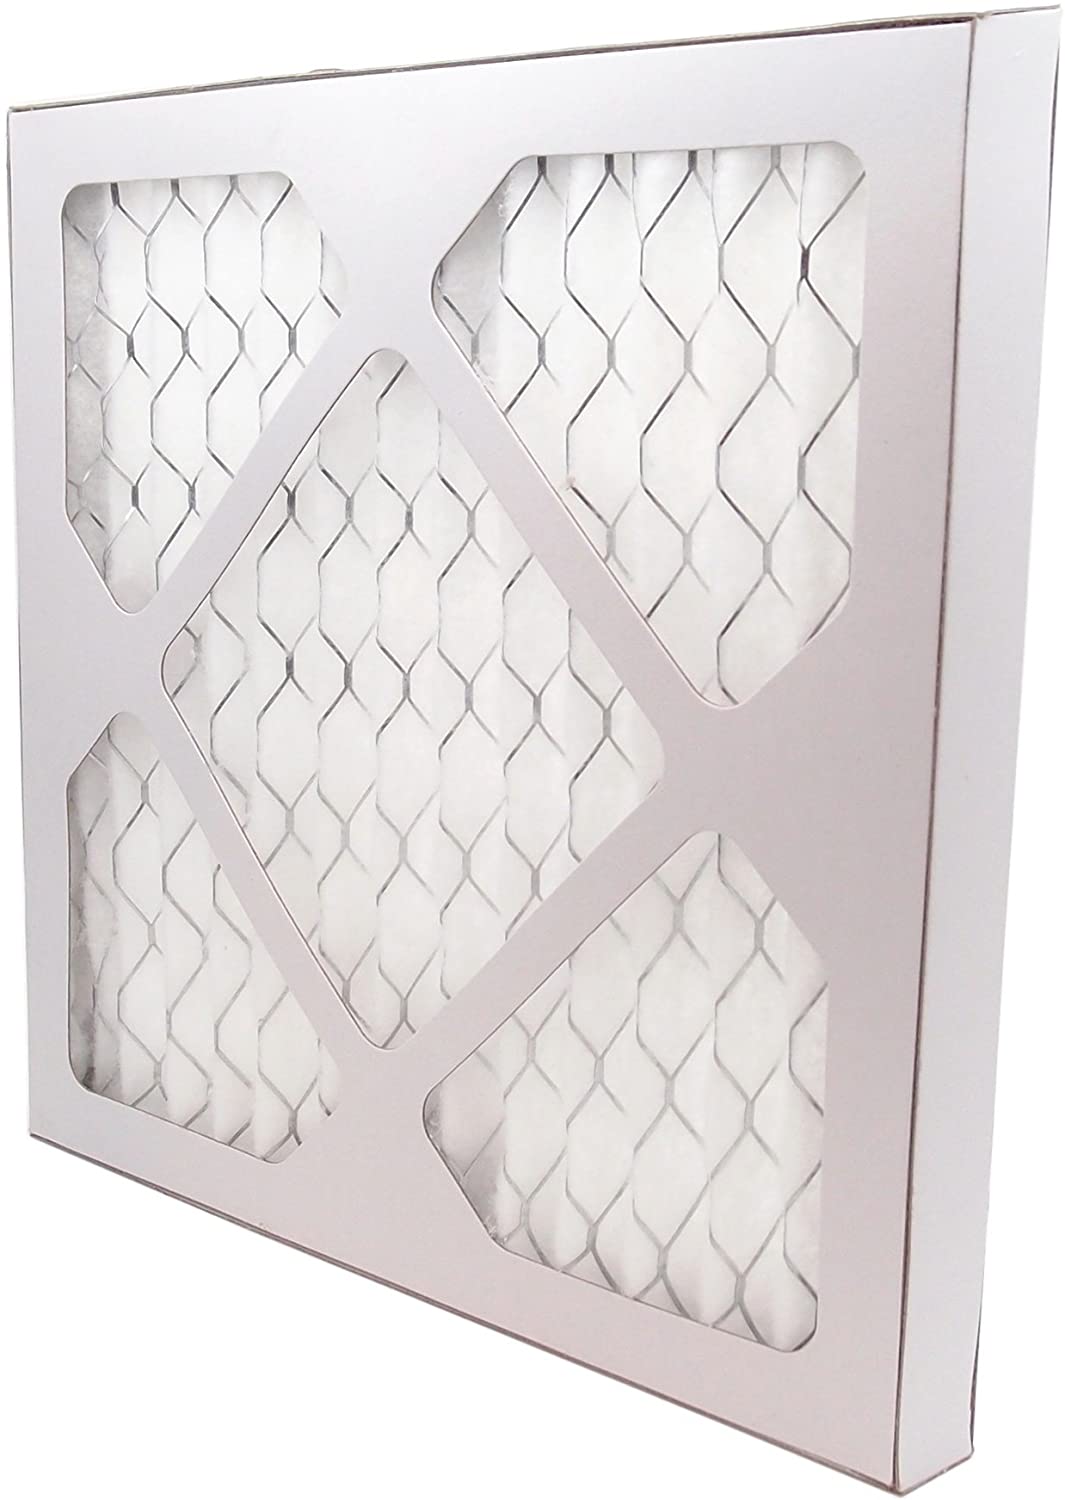 20&quot; x 16&quot; Pleated MERV 8 Filter for HVAC Return Filter Grille [Actual Dimensions: 19.75 X 15.75] 3-Pack